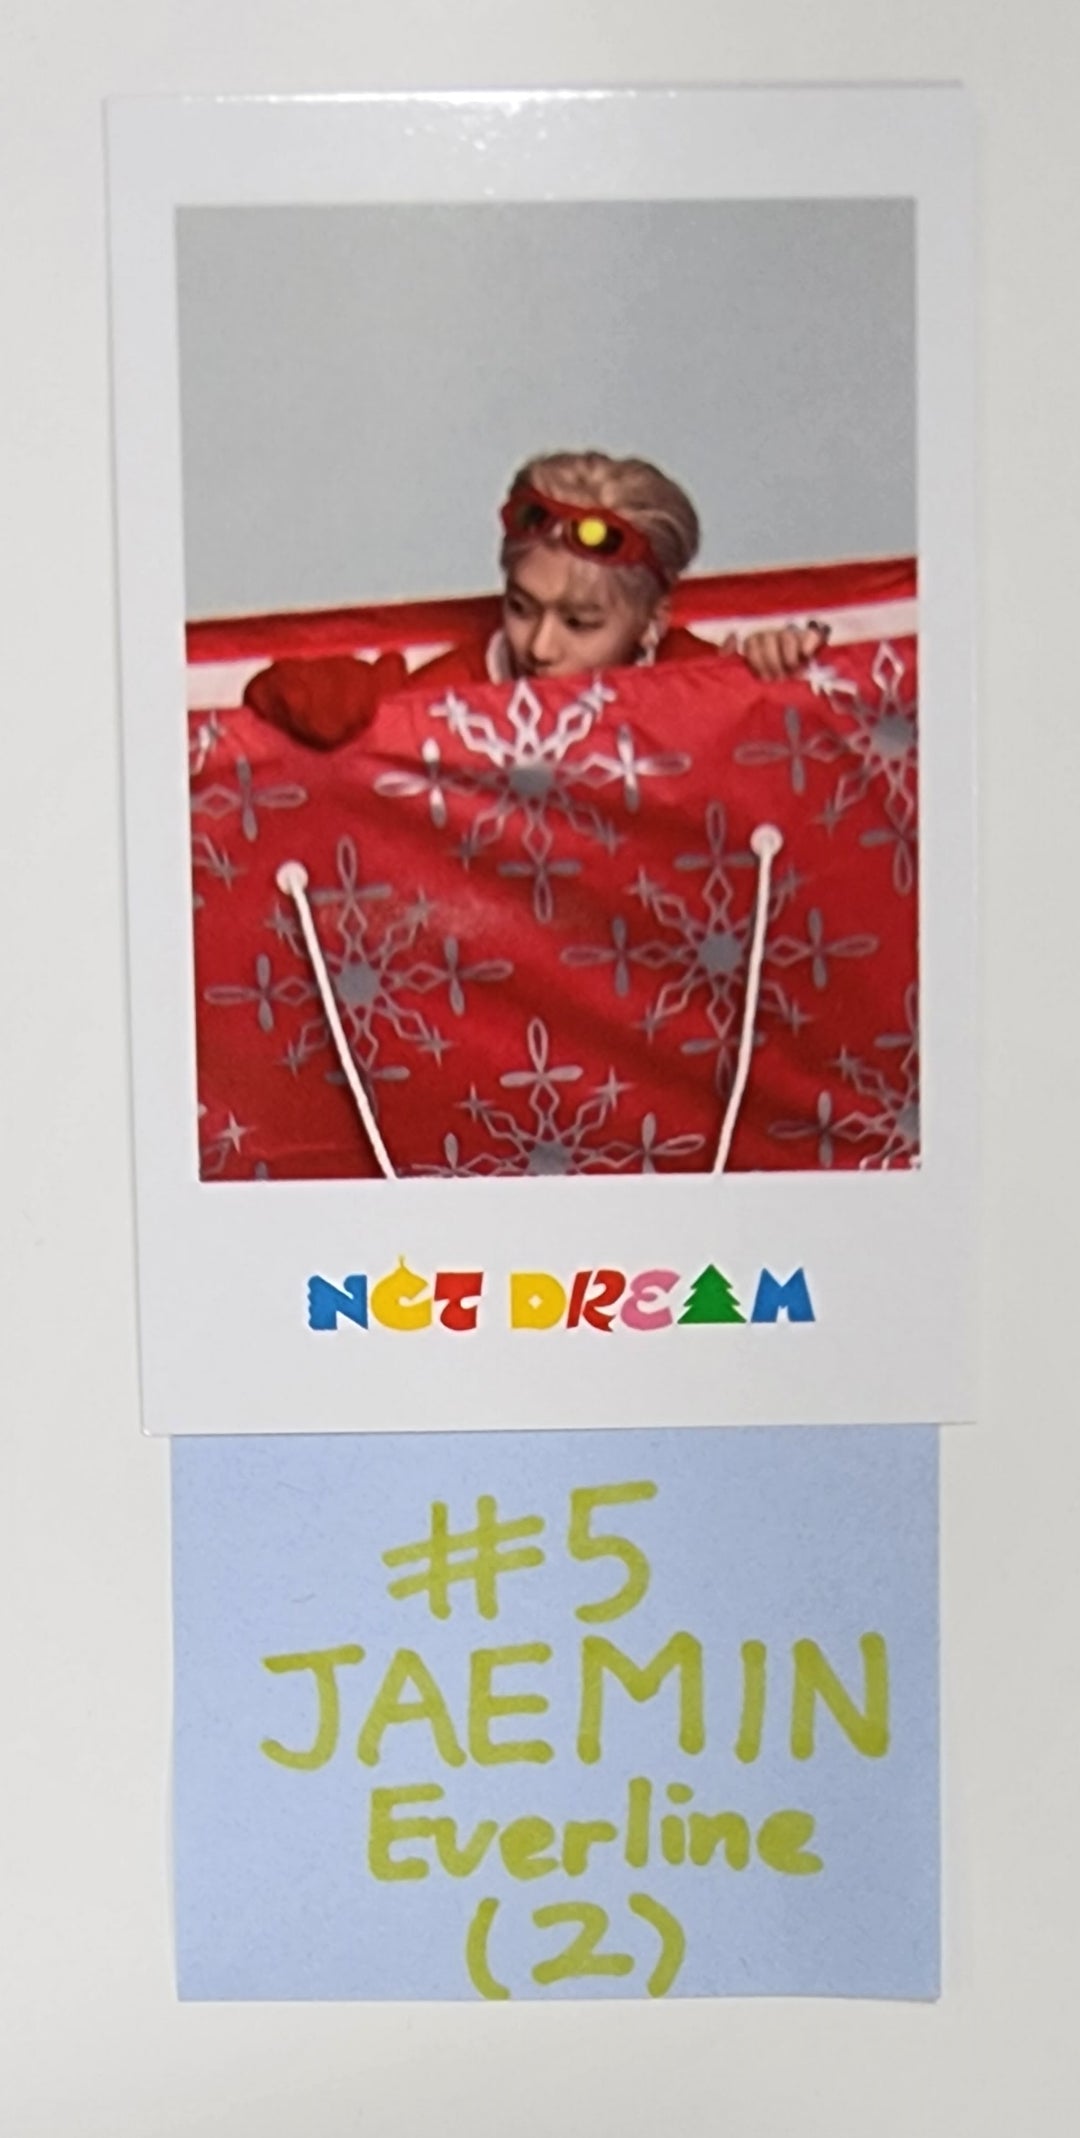 NCT DREAM "Candy" Winter Special Mini Album - Everline Fansign Event Polaroid Type Photocard [Photo Book Ver]